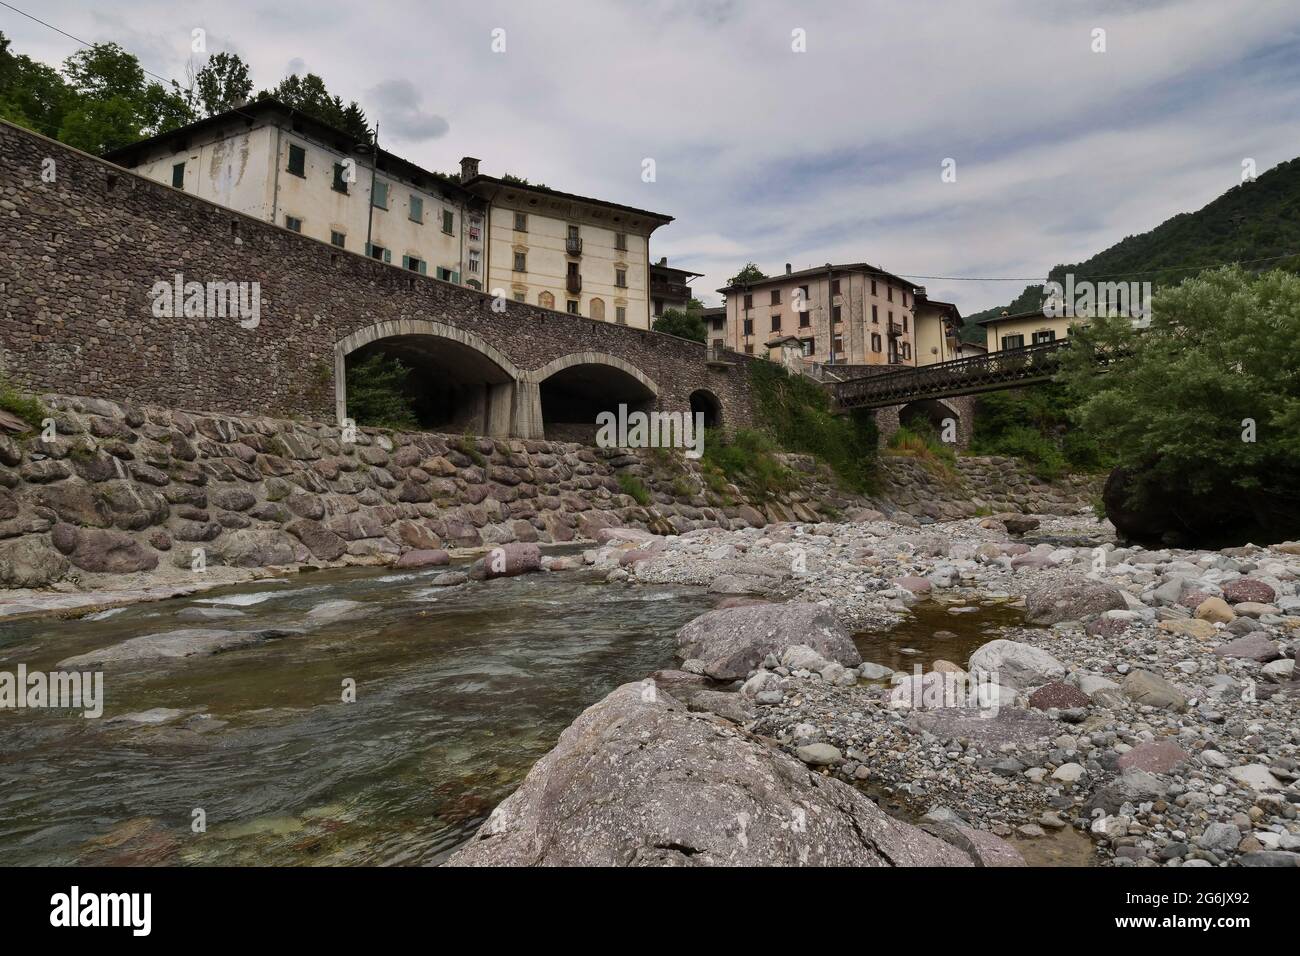 View of the small town of the Cassiglio 113 inhabitants in Brembana Valley Bergamo, Italy Stock Photo